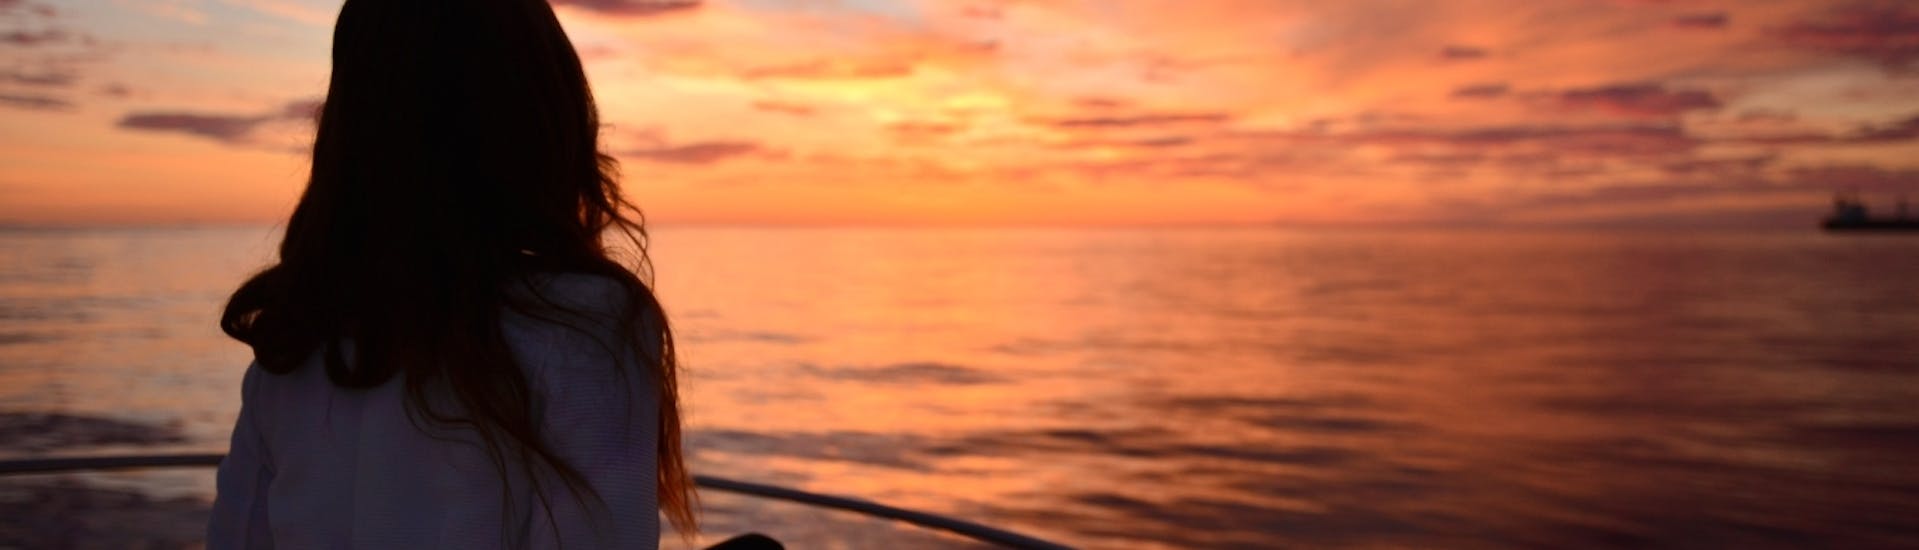 A woman admiring the sunset during a Private Sunset Boat Trip along the Ibiza Coast with Take Off Ibiza.